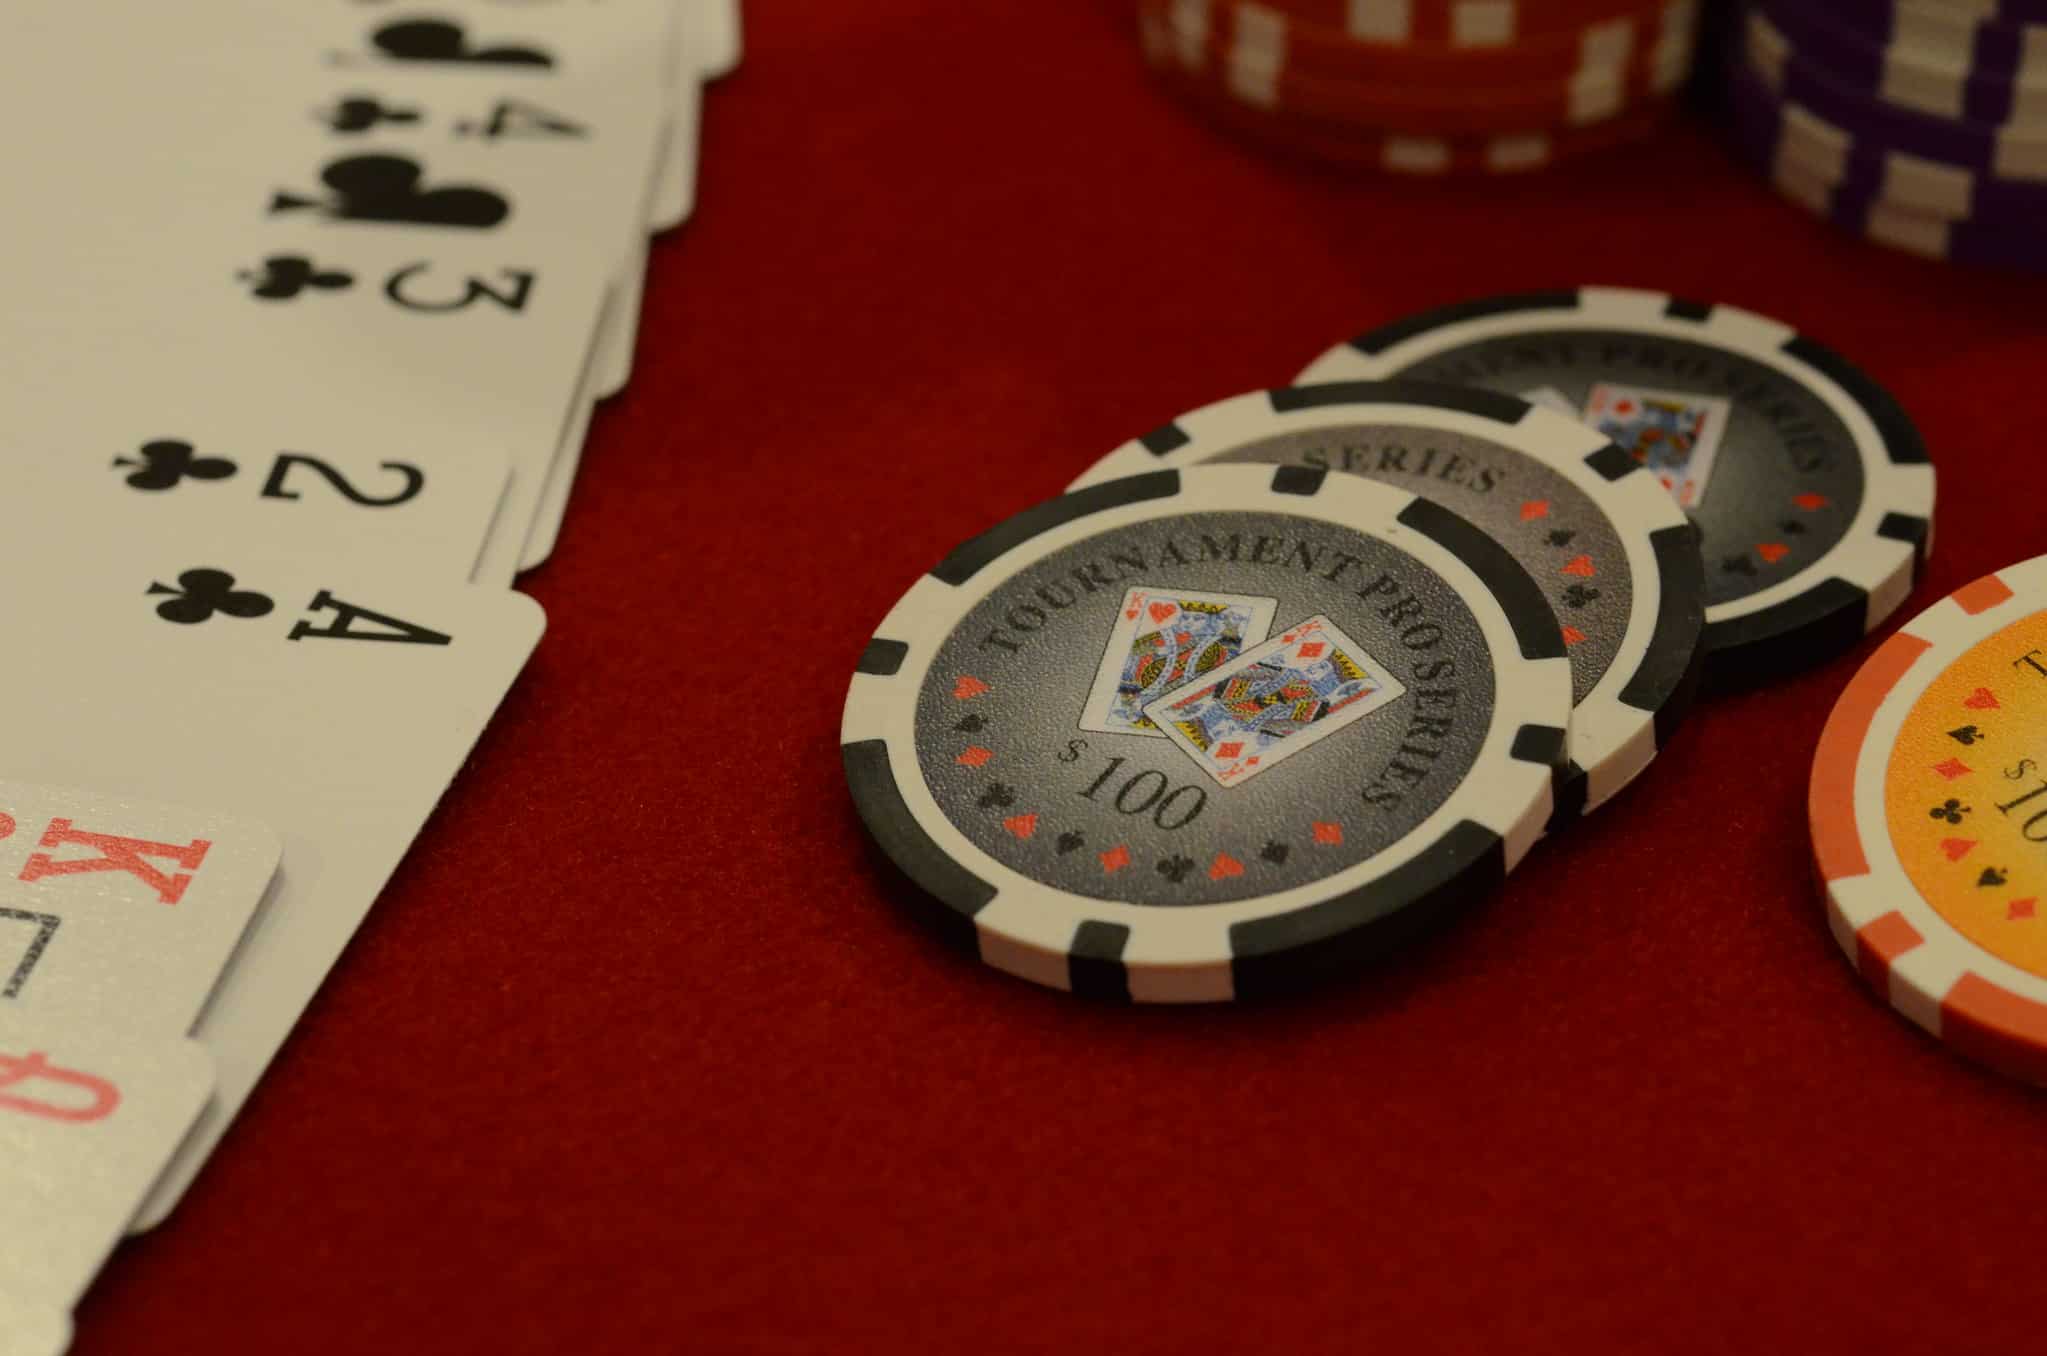 How long does a typical Casino Hold 'em game last?